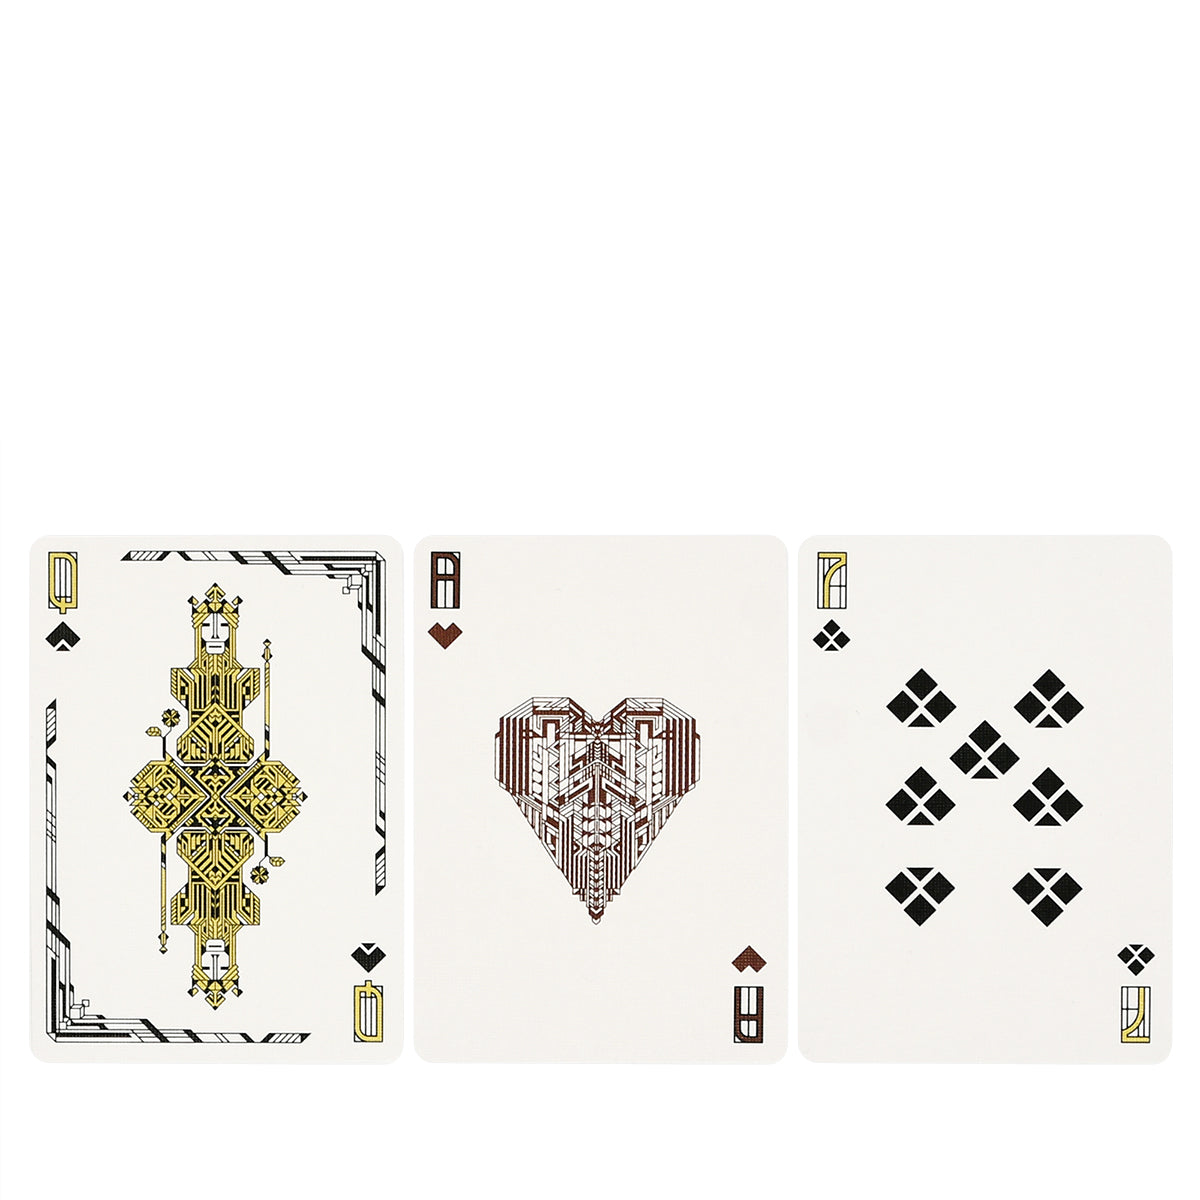 ART OF PLAY - PLAYING CARDS - FLW IMPERIAL HOTEL